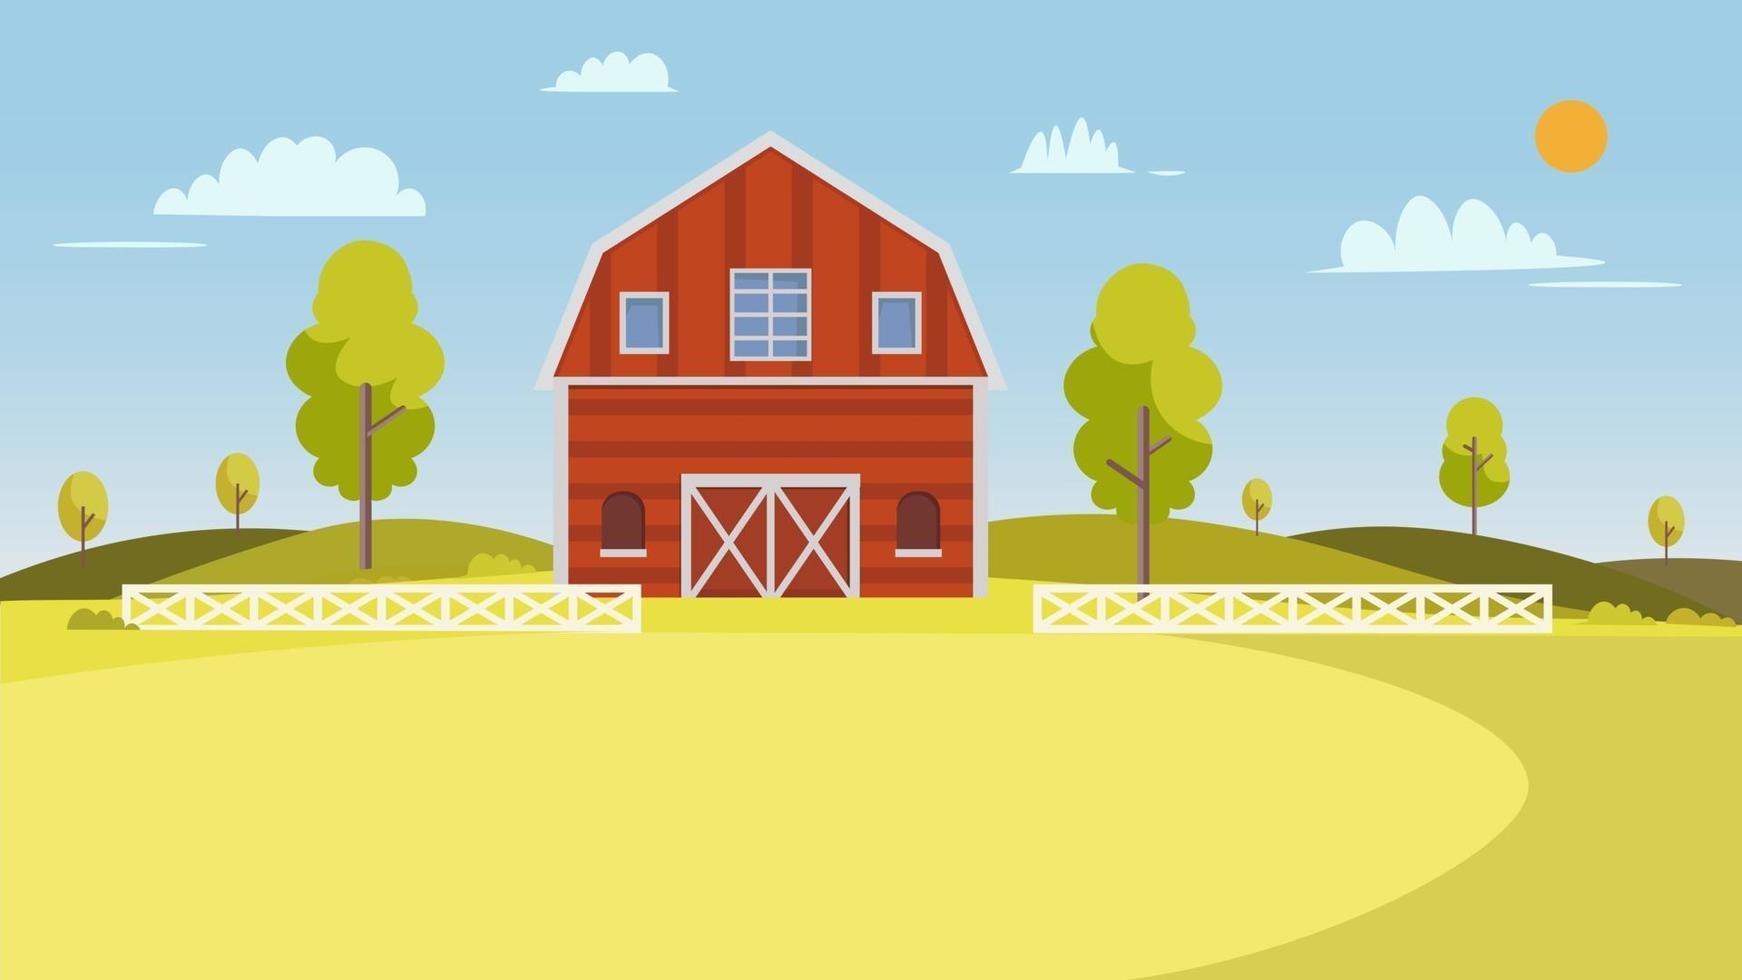 Fresh Farm landscape.Summer farm landscape with trees, clouds and sun. Rural scenery with barn Vector illustration